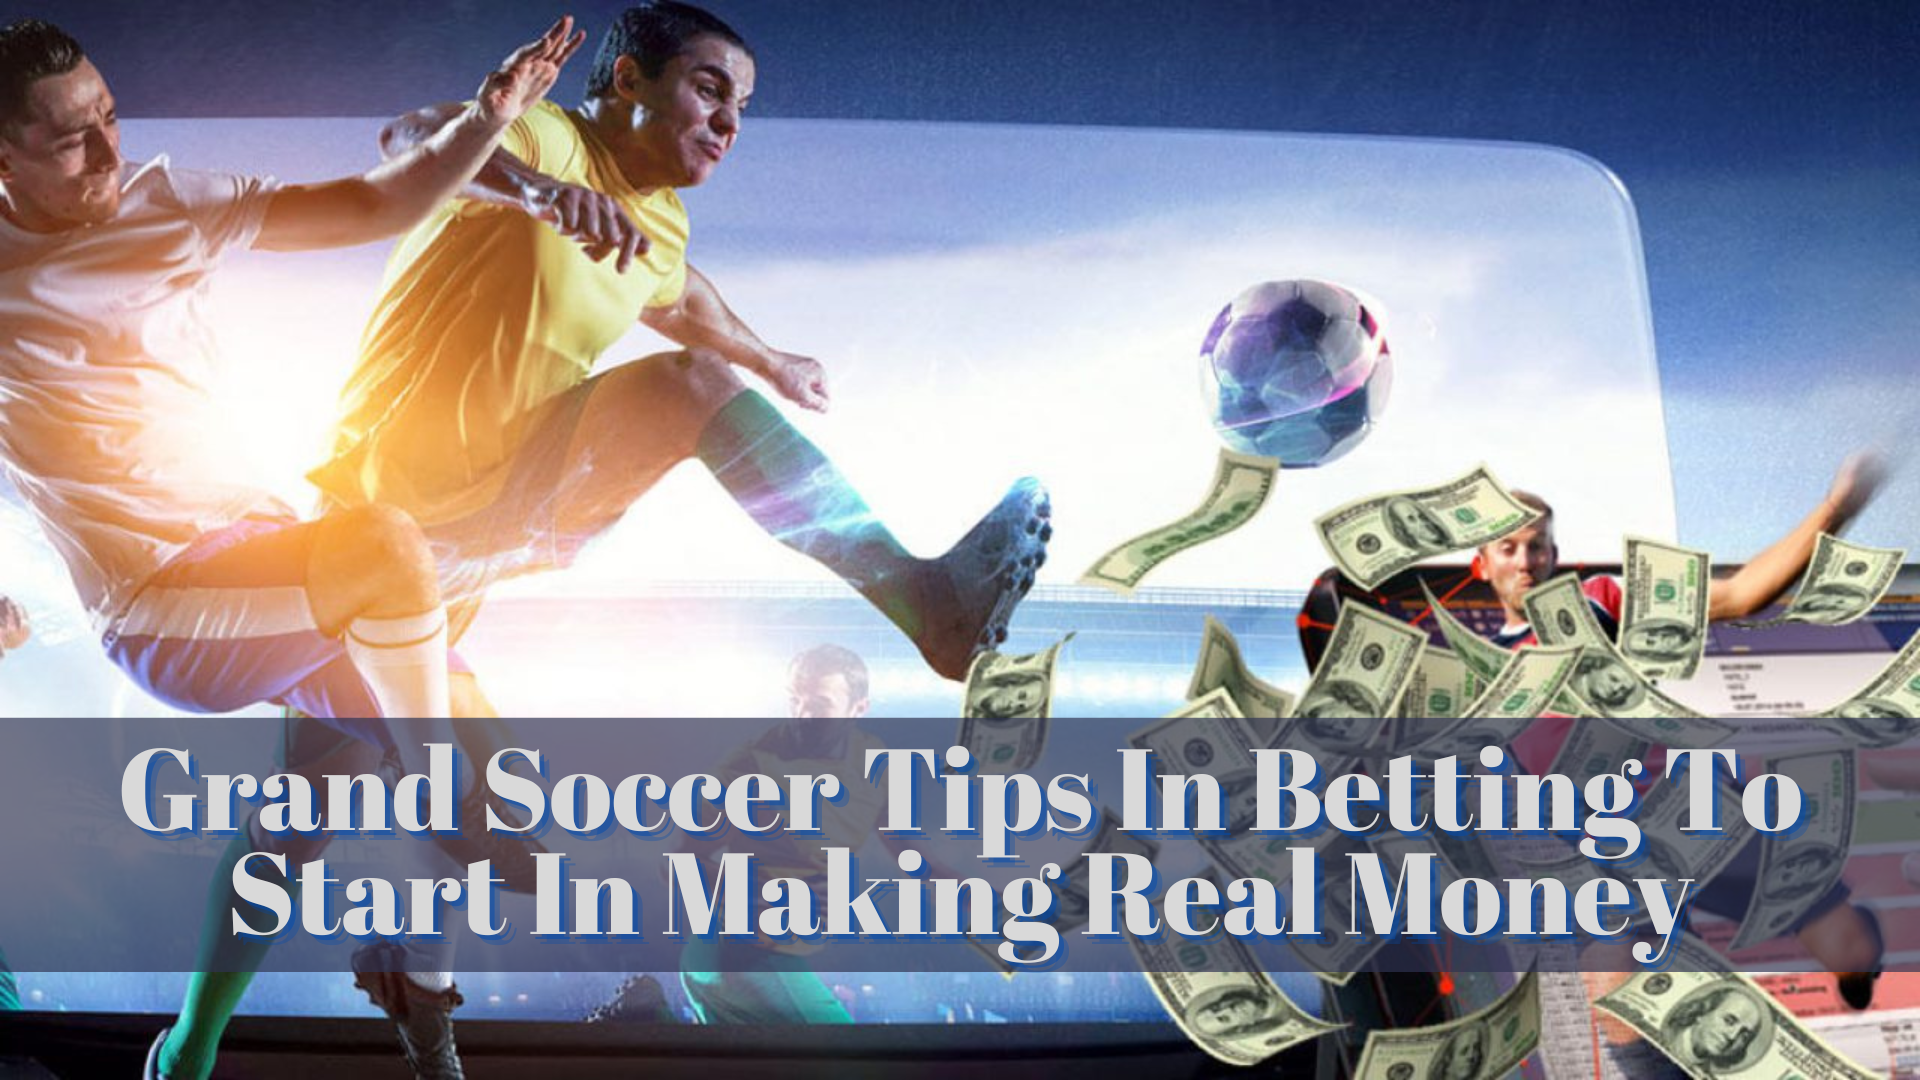 Grand Soccer Tips In Betting To Start In Making Real Money